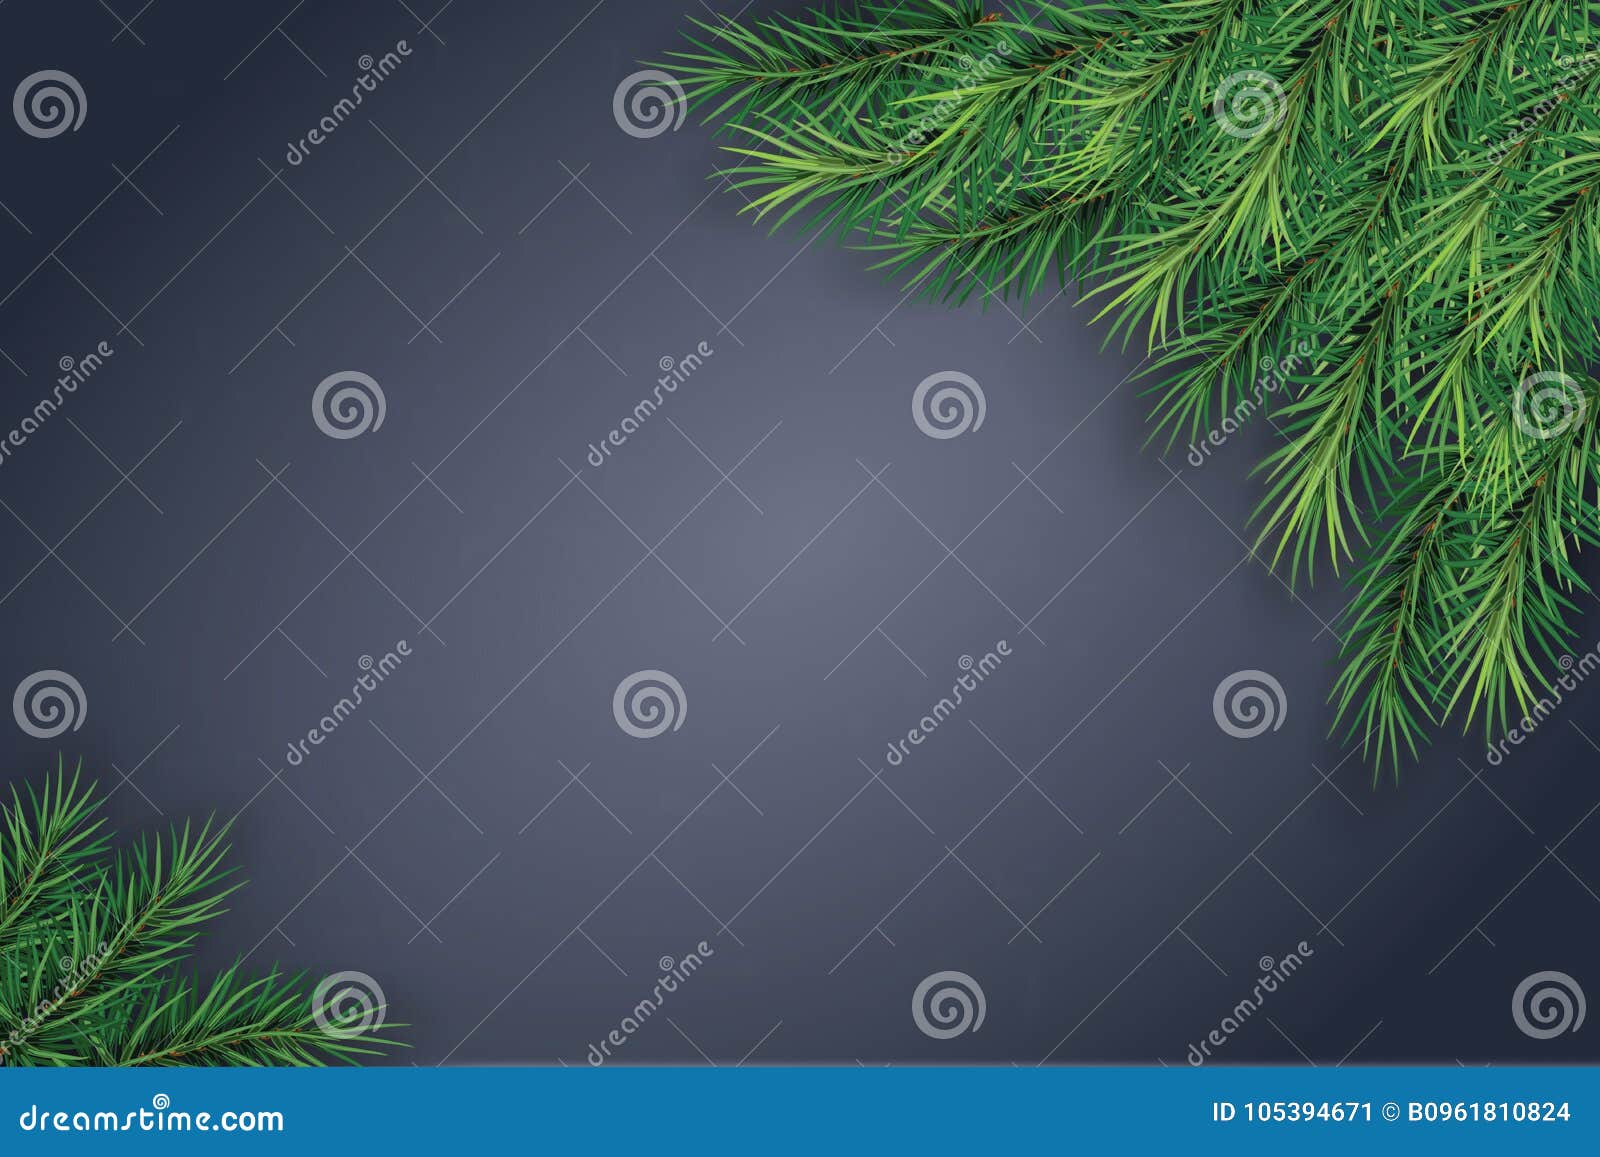 Sammenbrud Tegnsætning Remission Christmas Tree Branches on a Dark Background. Festive Nature Background.  Stock Illustration - Illustration of dark, fairy: 105394671